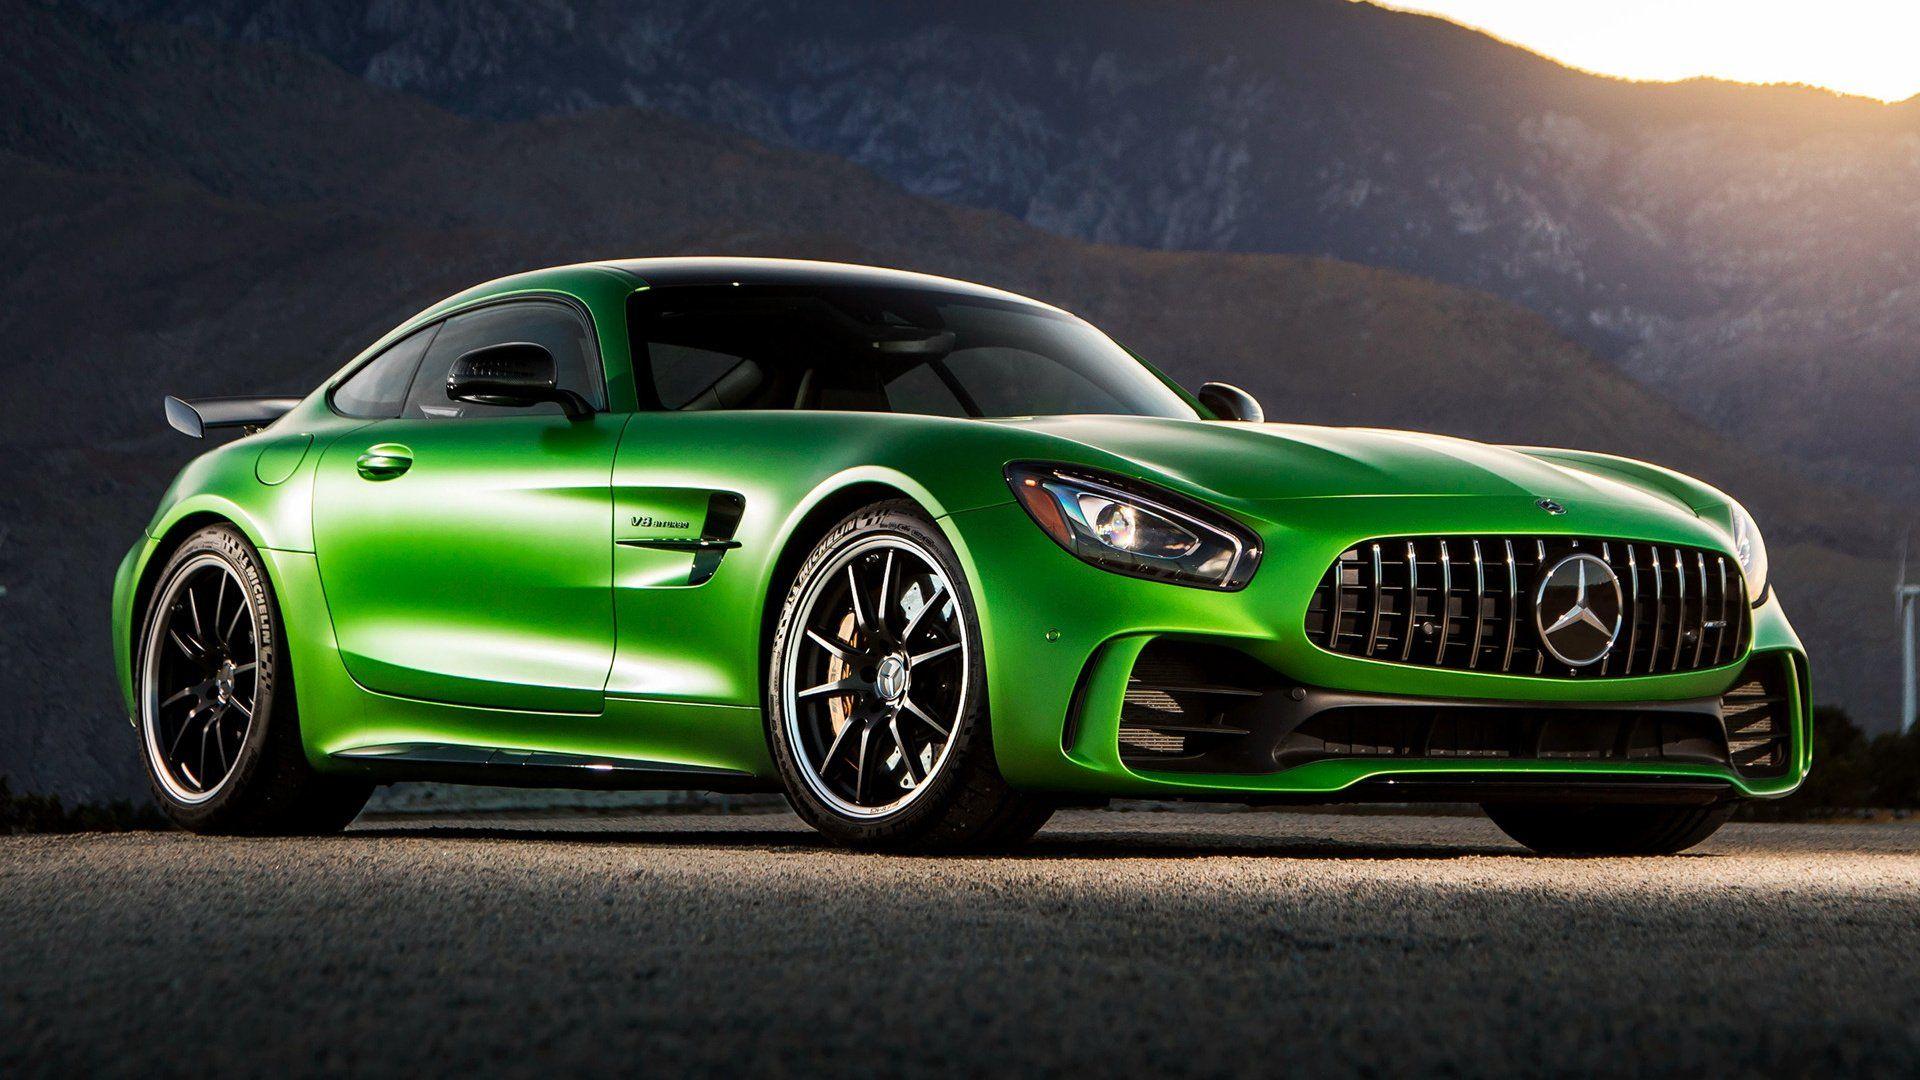 AMG GTR wallpaper by Lbz69  Download on ZEDGE  450f